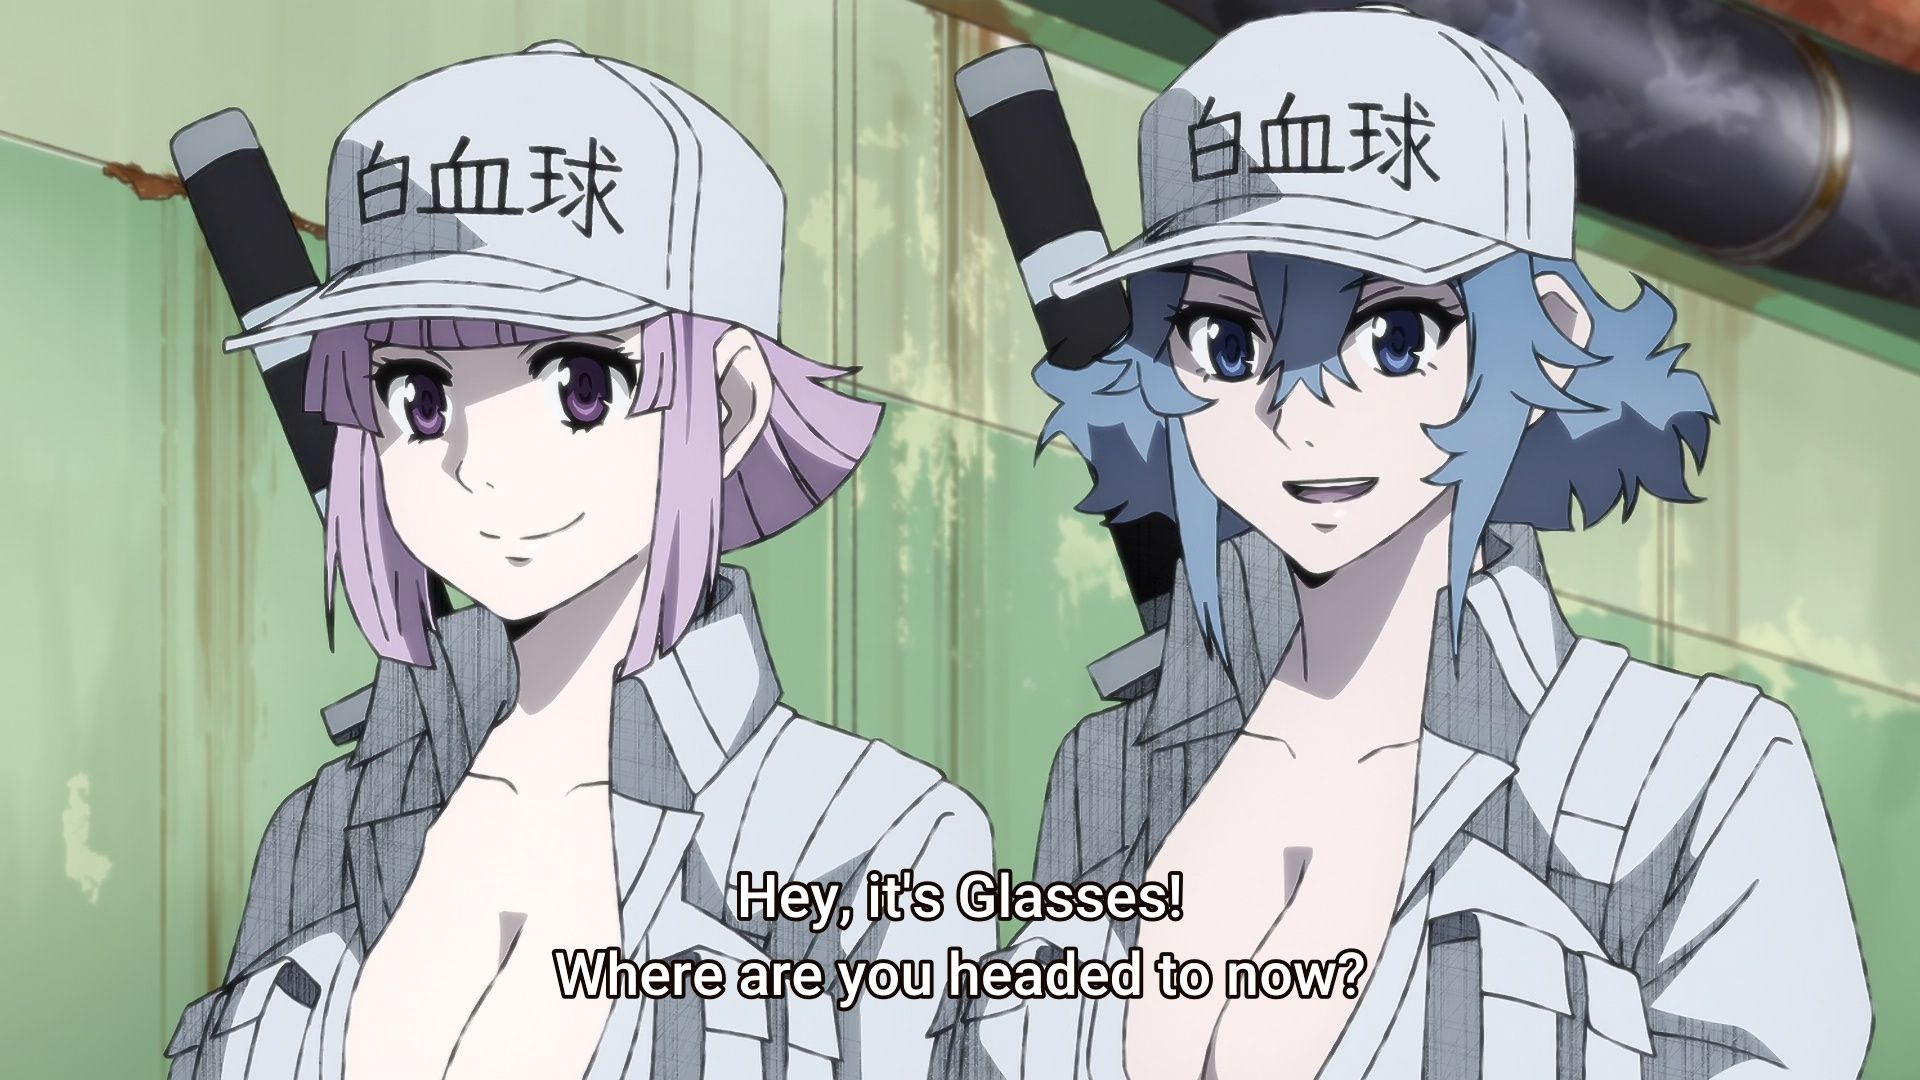 Male vs. Female white blood cells in Cells at Work, because if